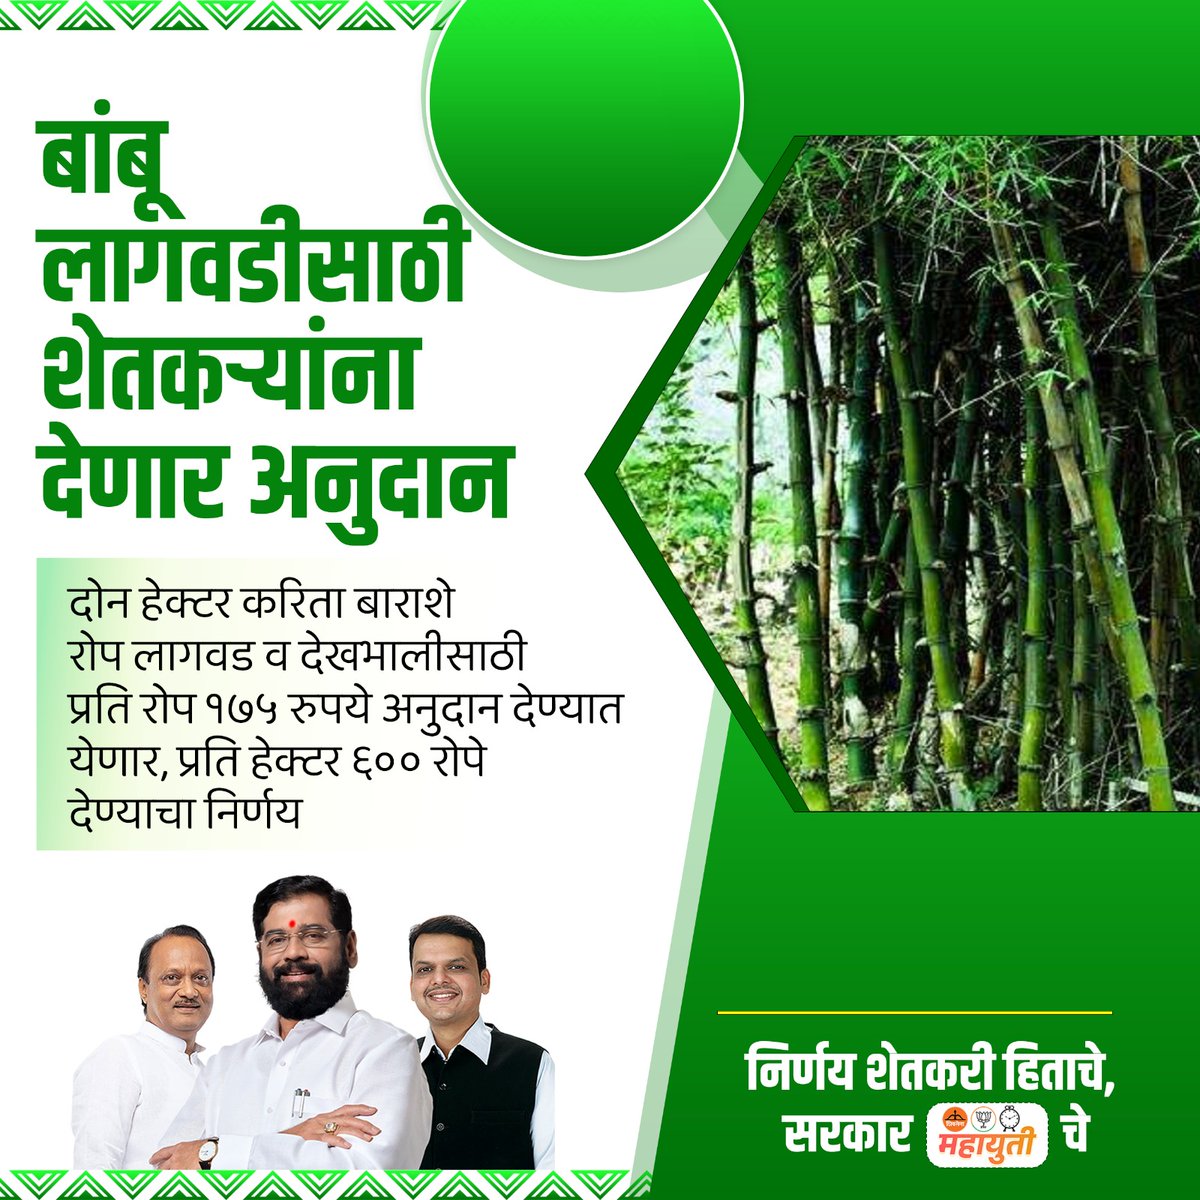 Hats off to CM Eknath Shinde Govt for promoting sustainable agriculture! The subsidy of Rupees 175 per plant for bamboo cultivation is a great step towards empowering farmers and boosting green initiatives.